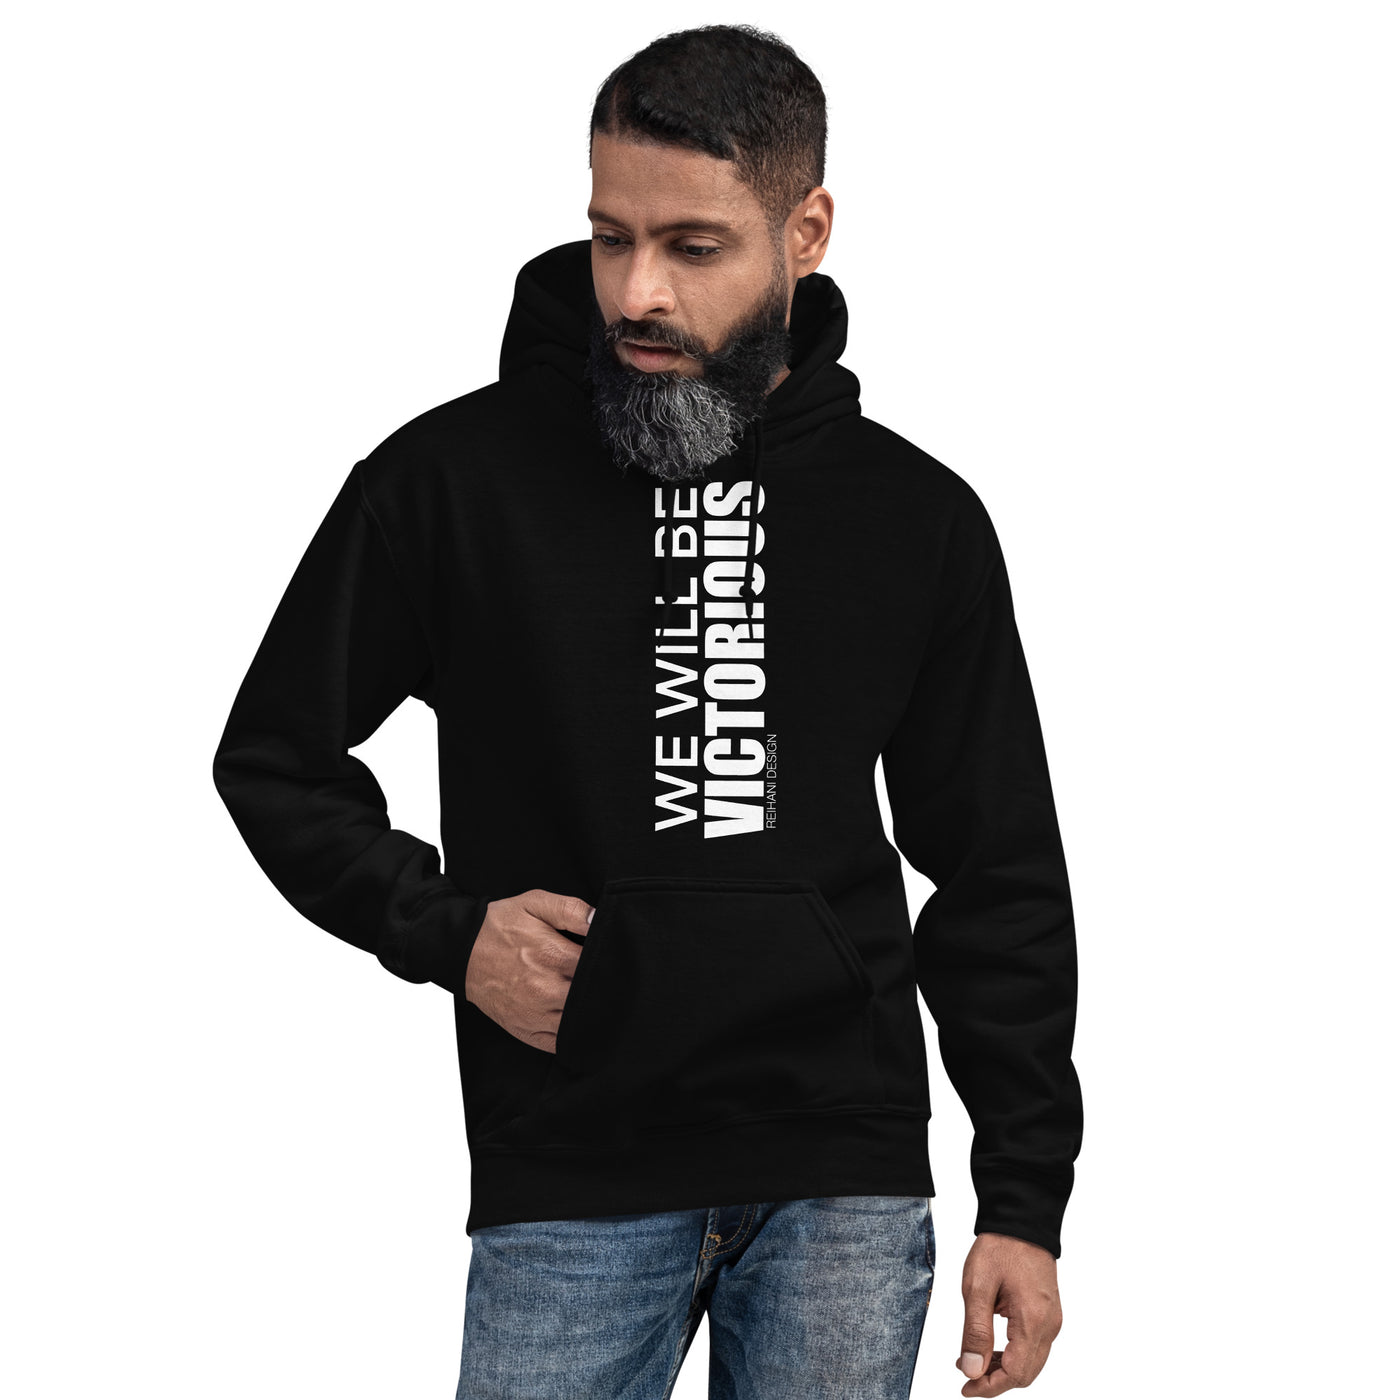 Unisex Hoodie with "WE WILL BE VICTORIOUS" IMPRINT